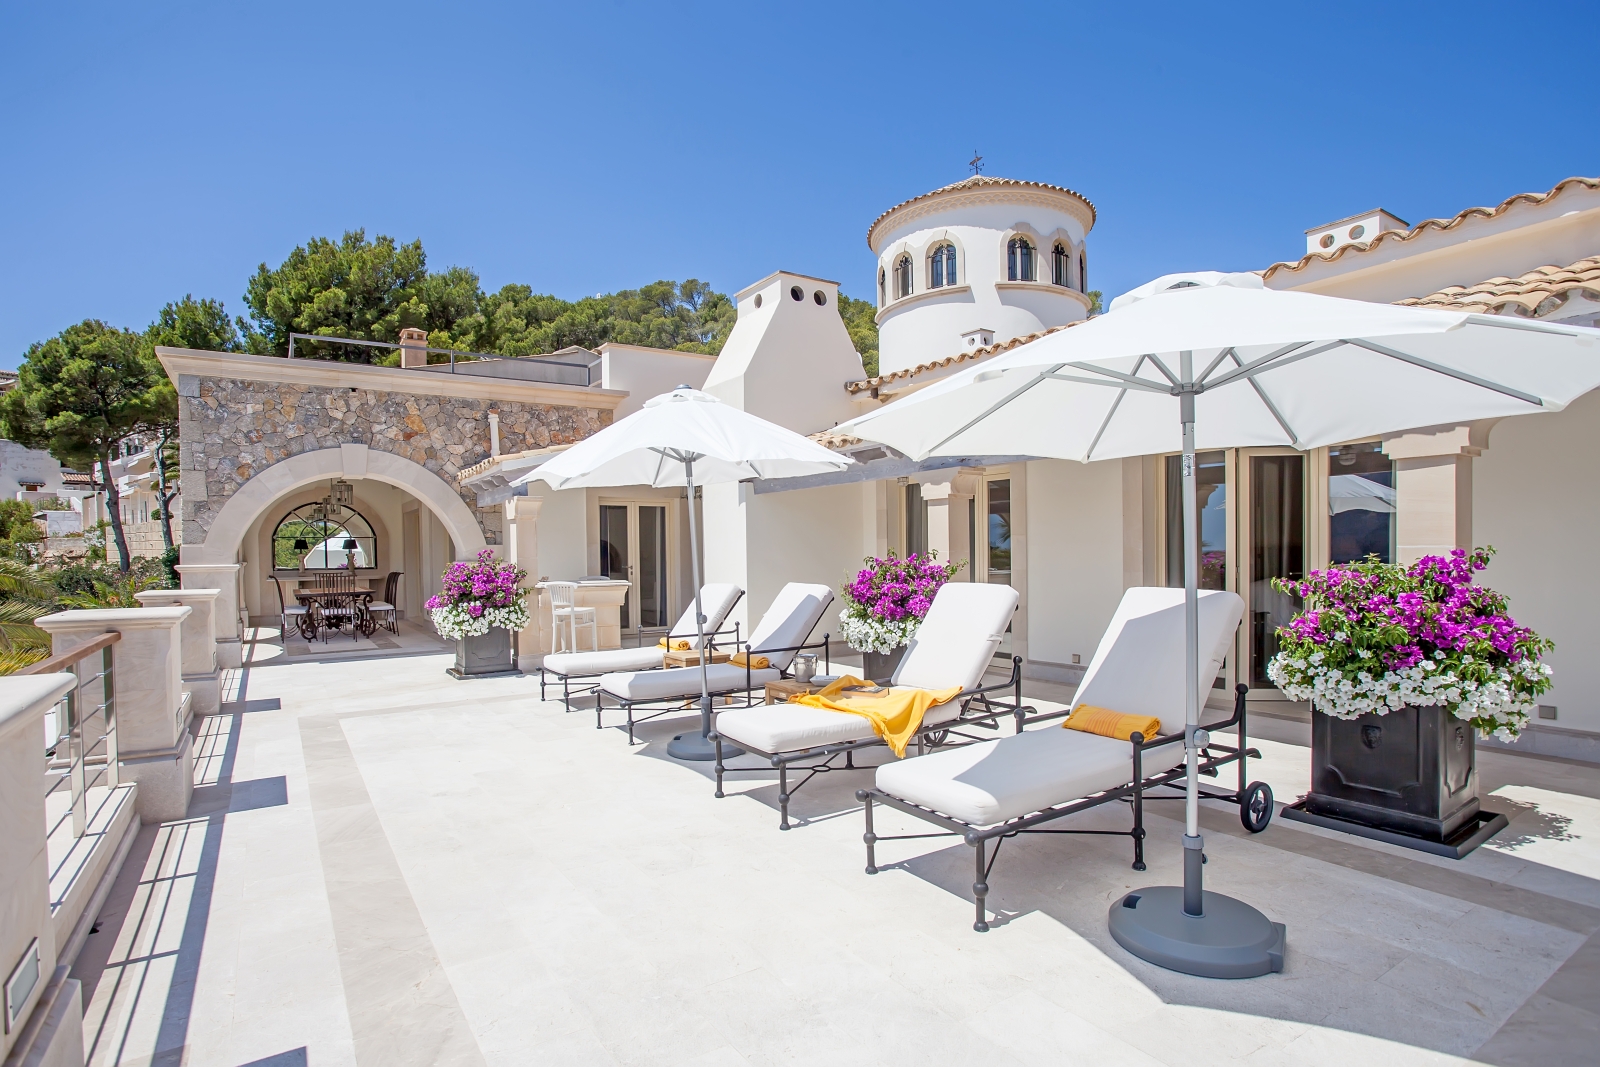 Terrace with sun loungers, umbrellas, flowers and covered dining area at Vista Marmessen in Mallorca, Spain